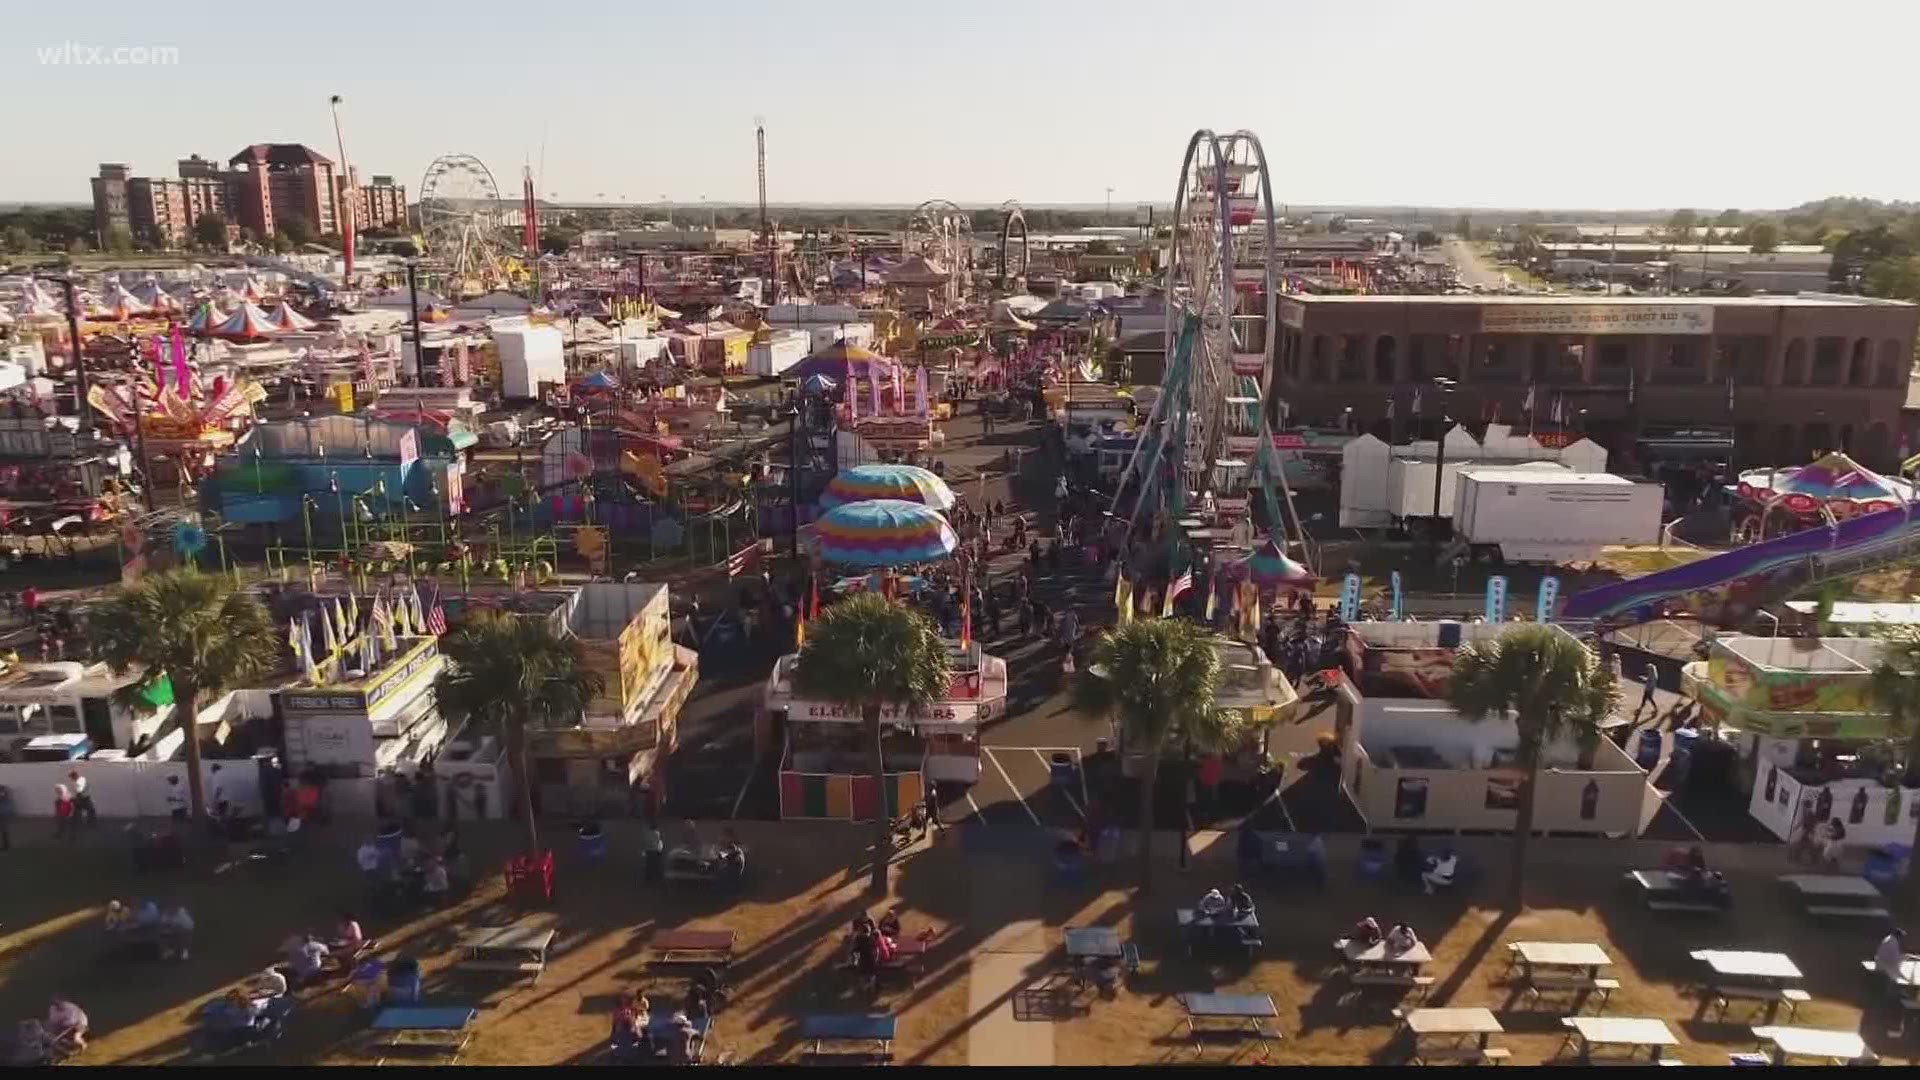 This year will mark the 152nd state fair. The fun returns to the fairgrounds between October 13th and the 24th.